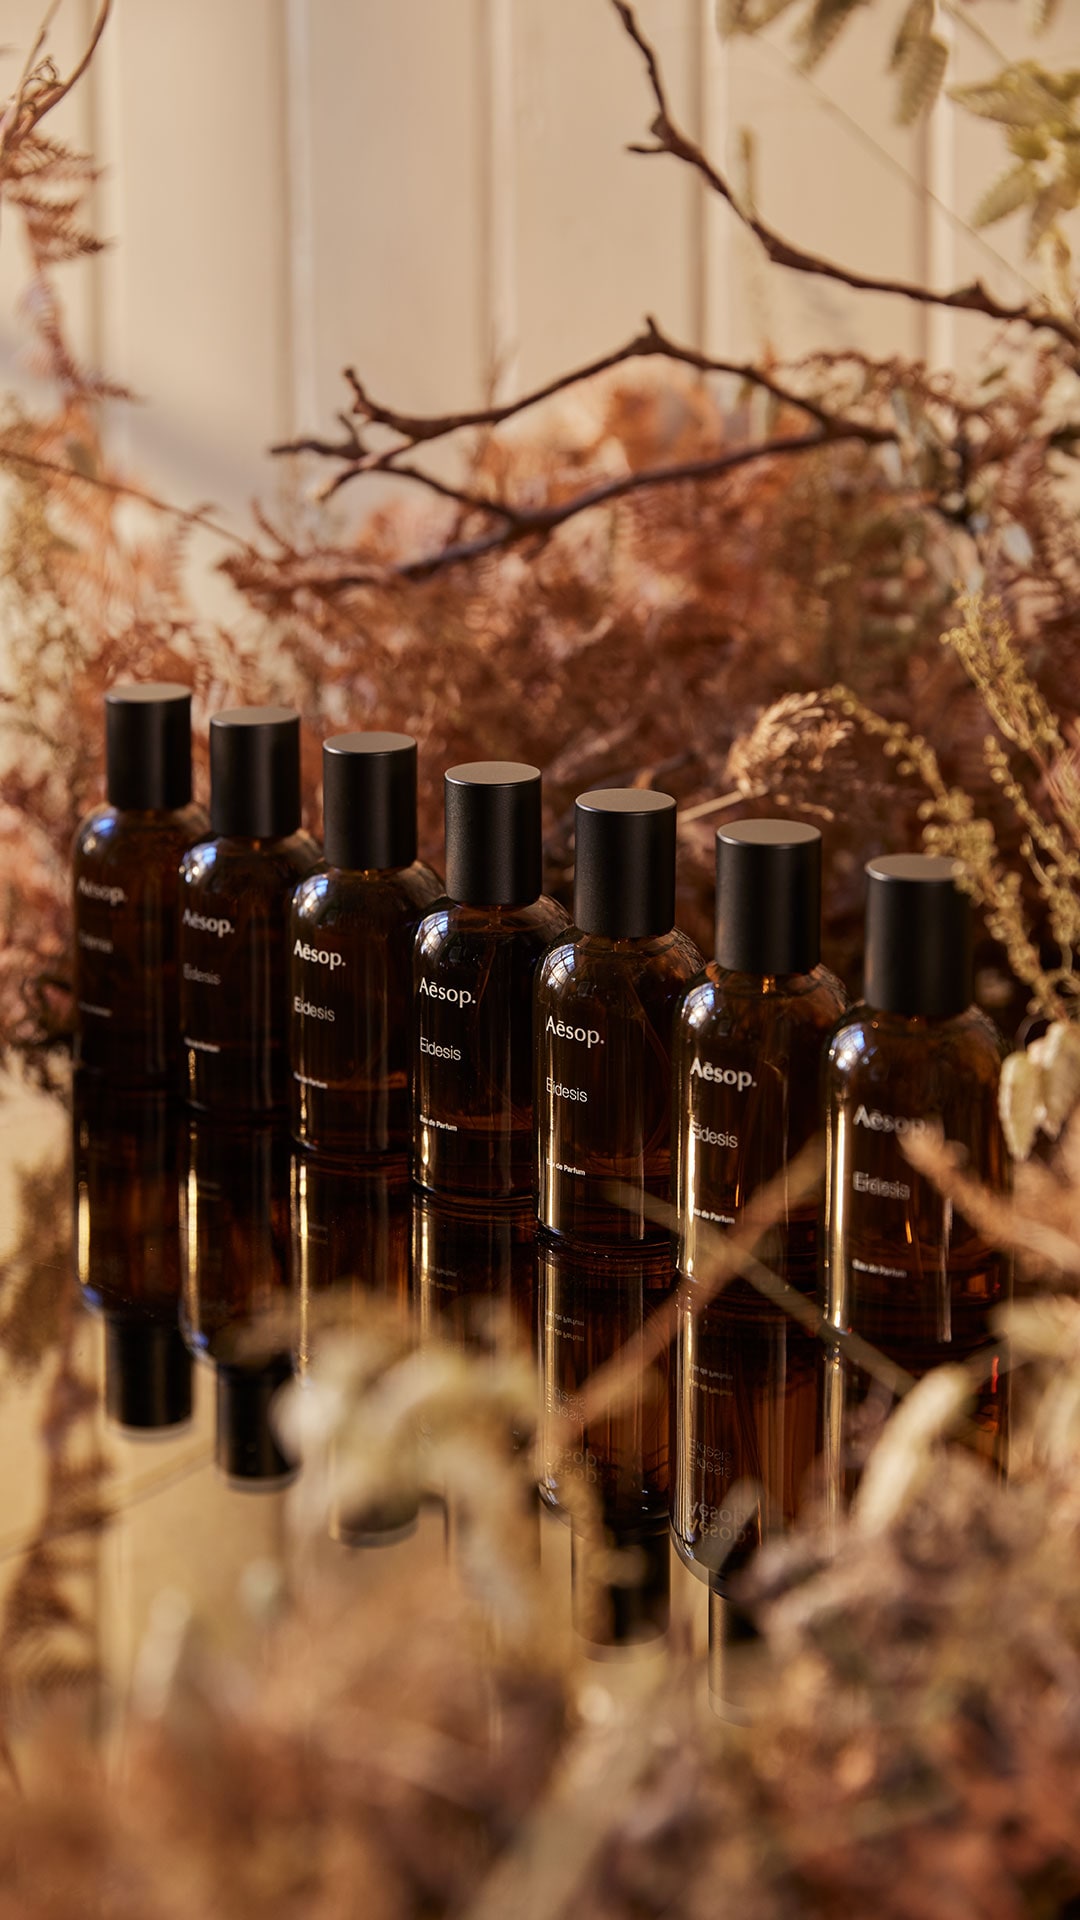 Seven bottles of Eidesis Eau de Parfum lined up on a reflective surface, framed by dried autumnal foliage.